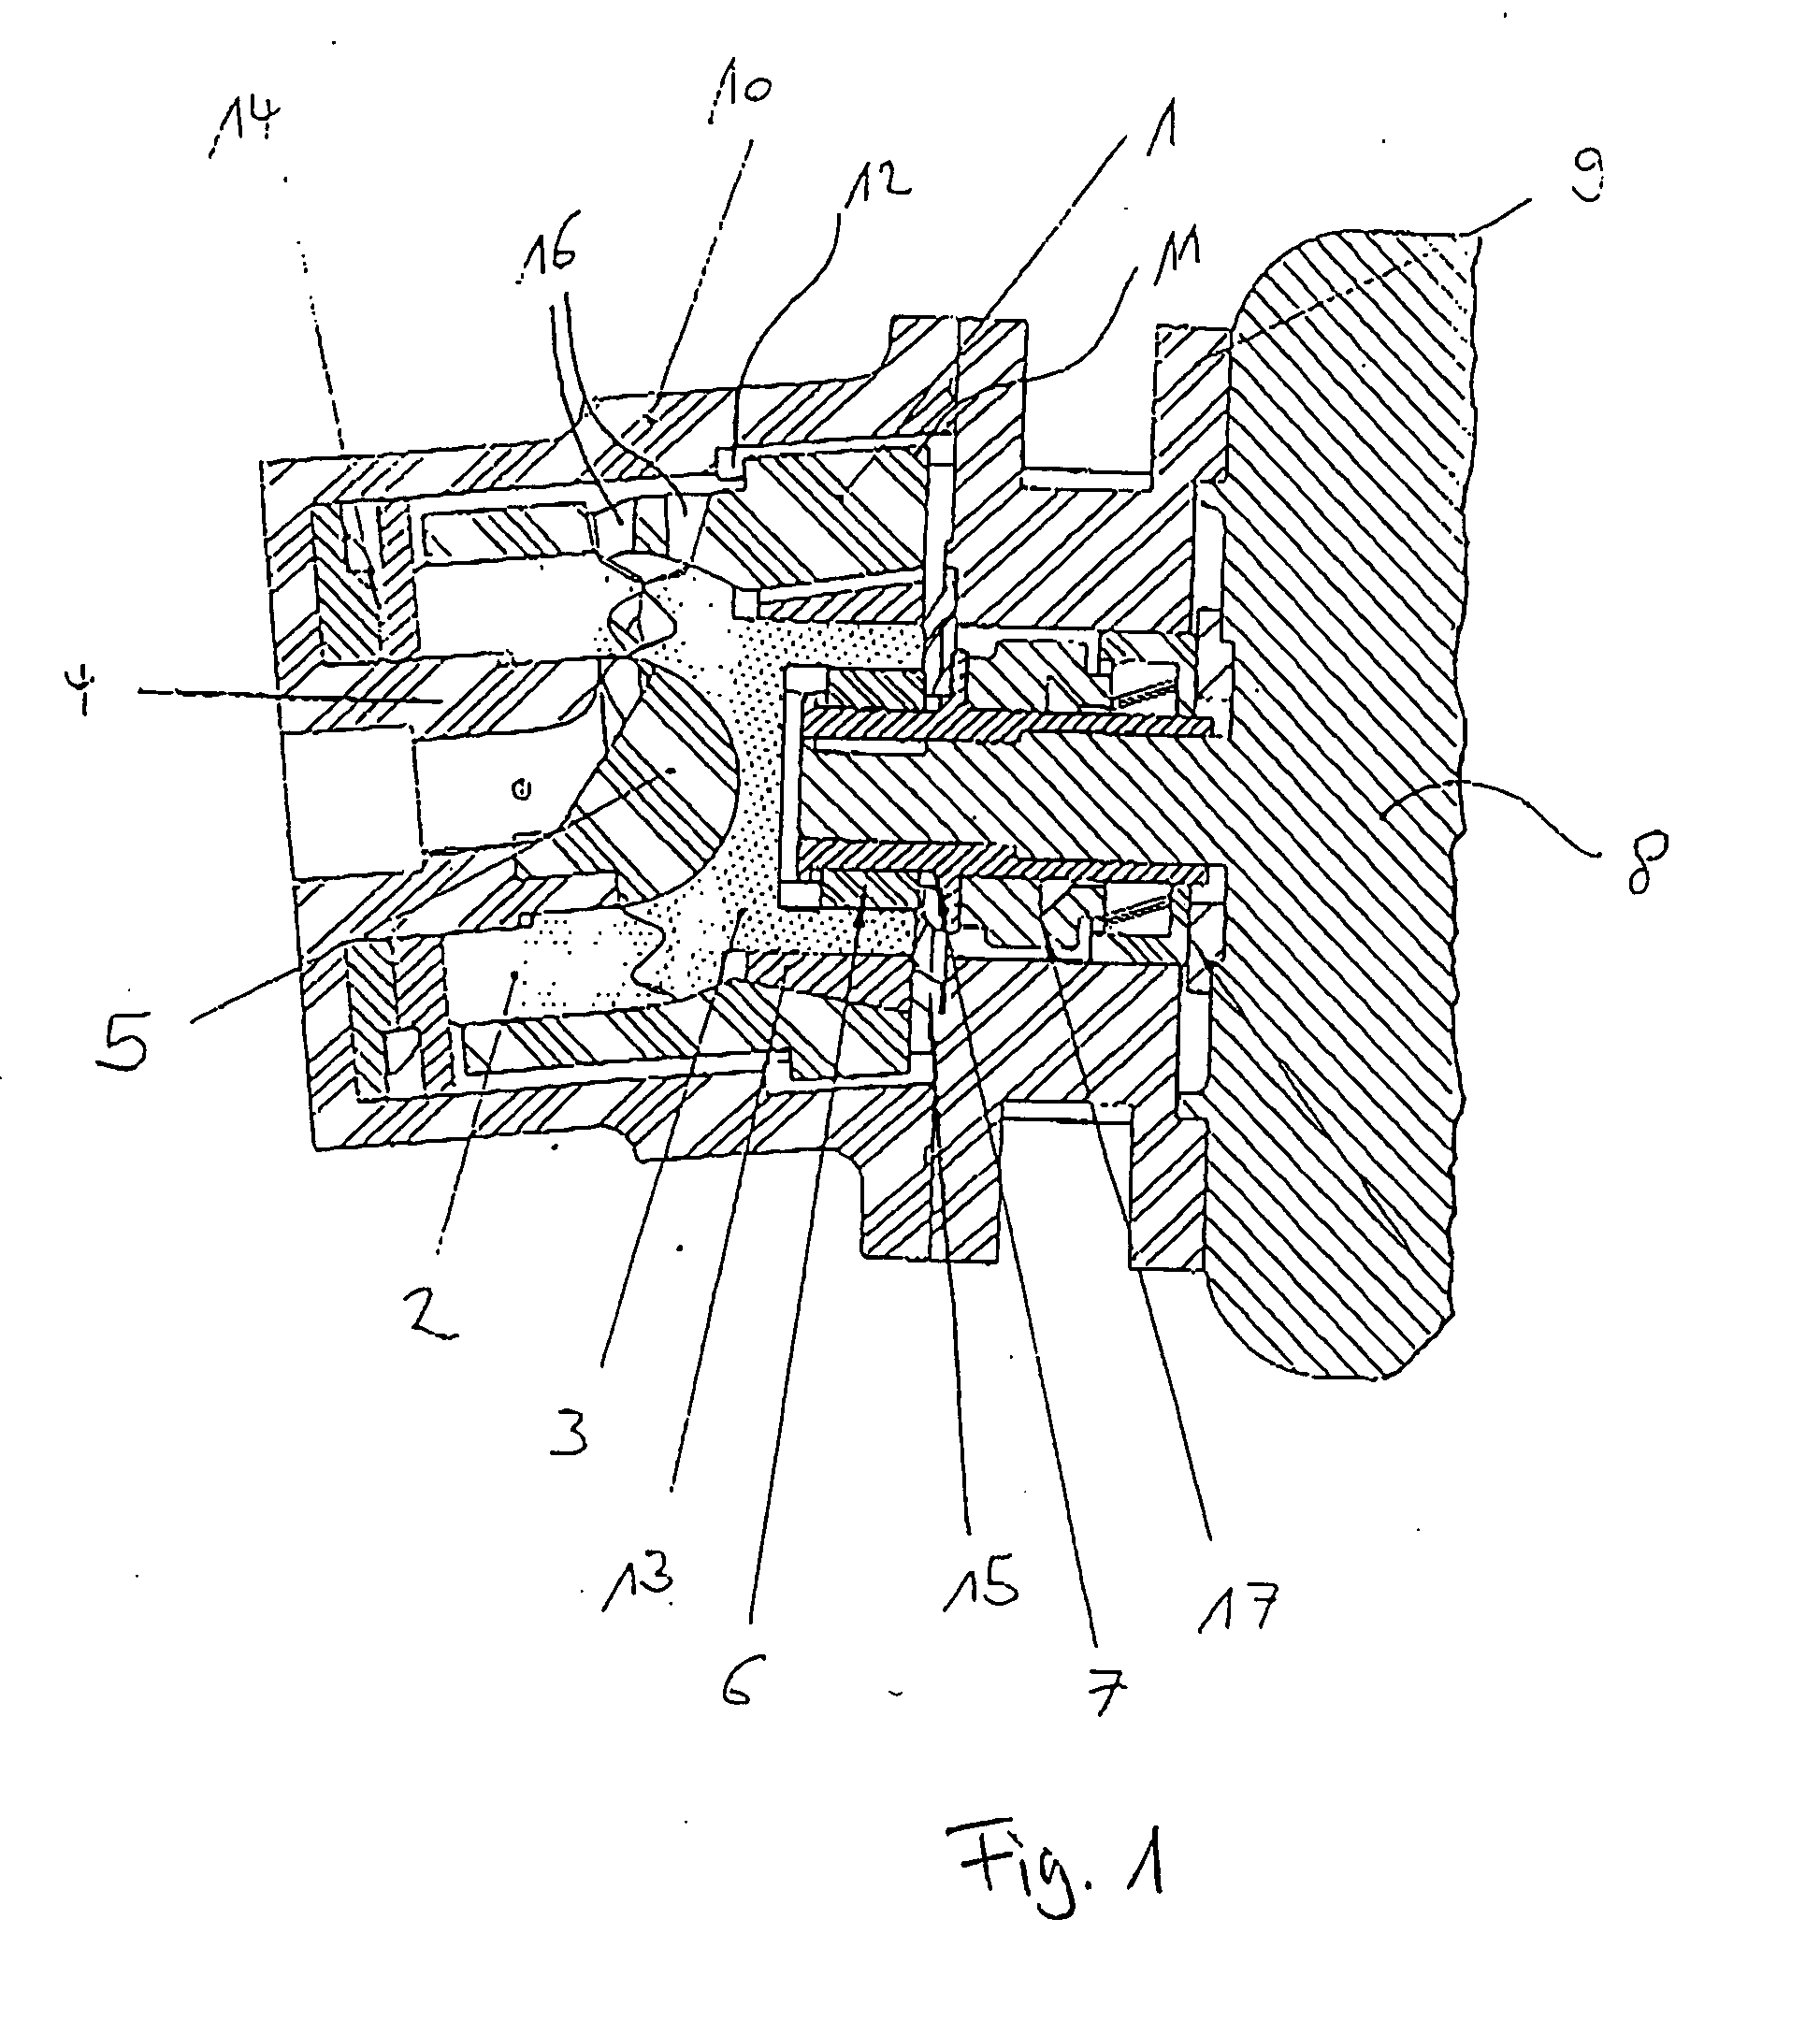 Rotary piston machines comprising a displaceable inner housing